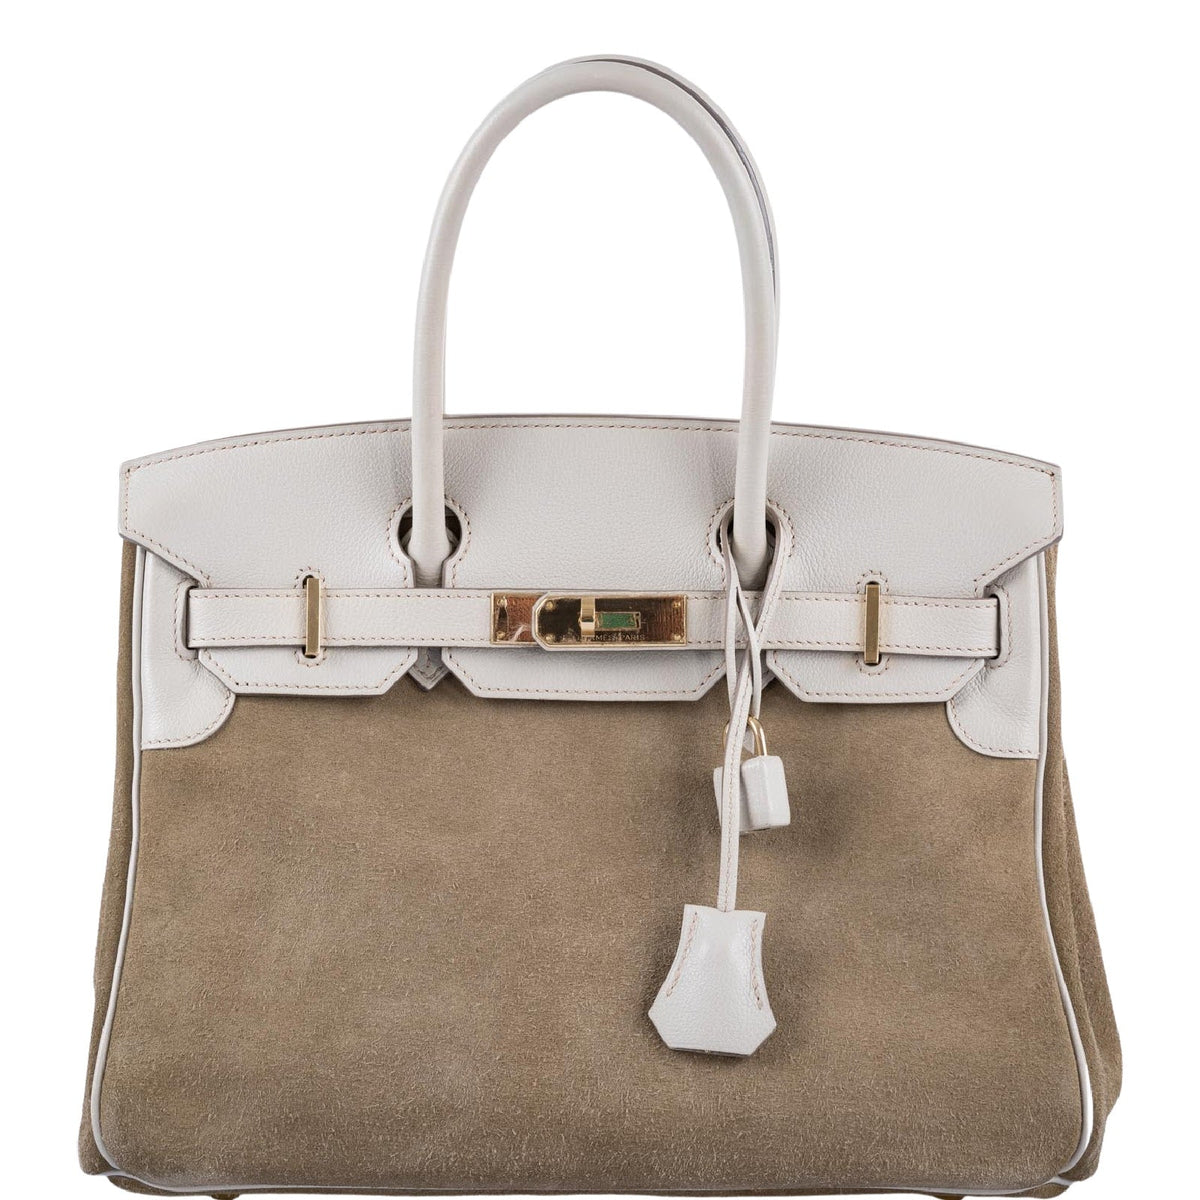 Hermes, Bags, Herms Birkin Bag Rare Sellier Style In Color Gris Etain